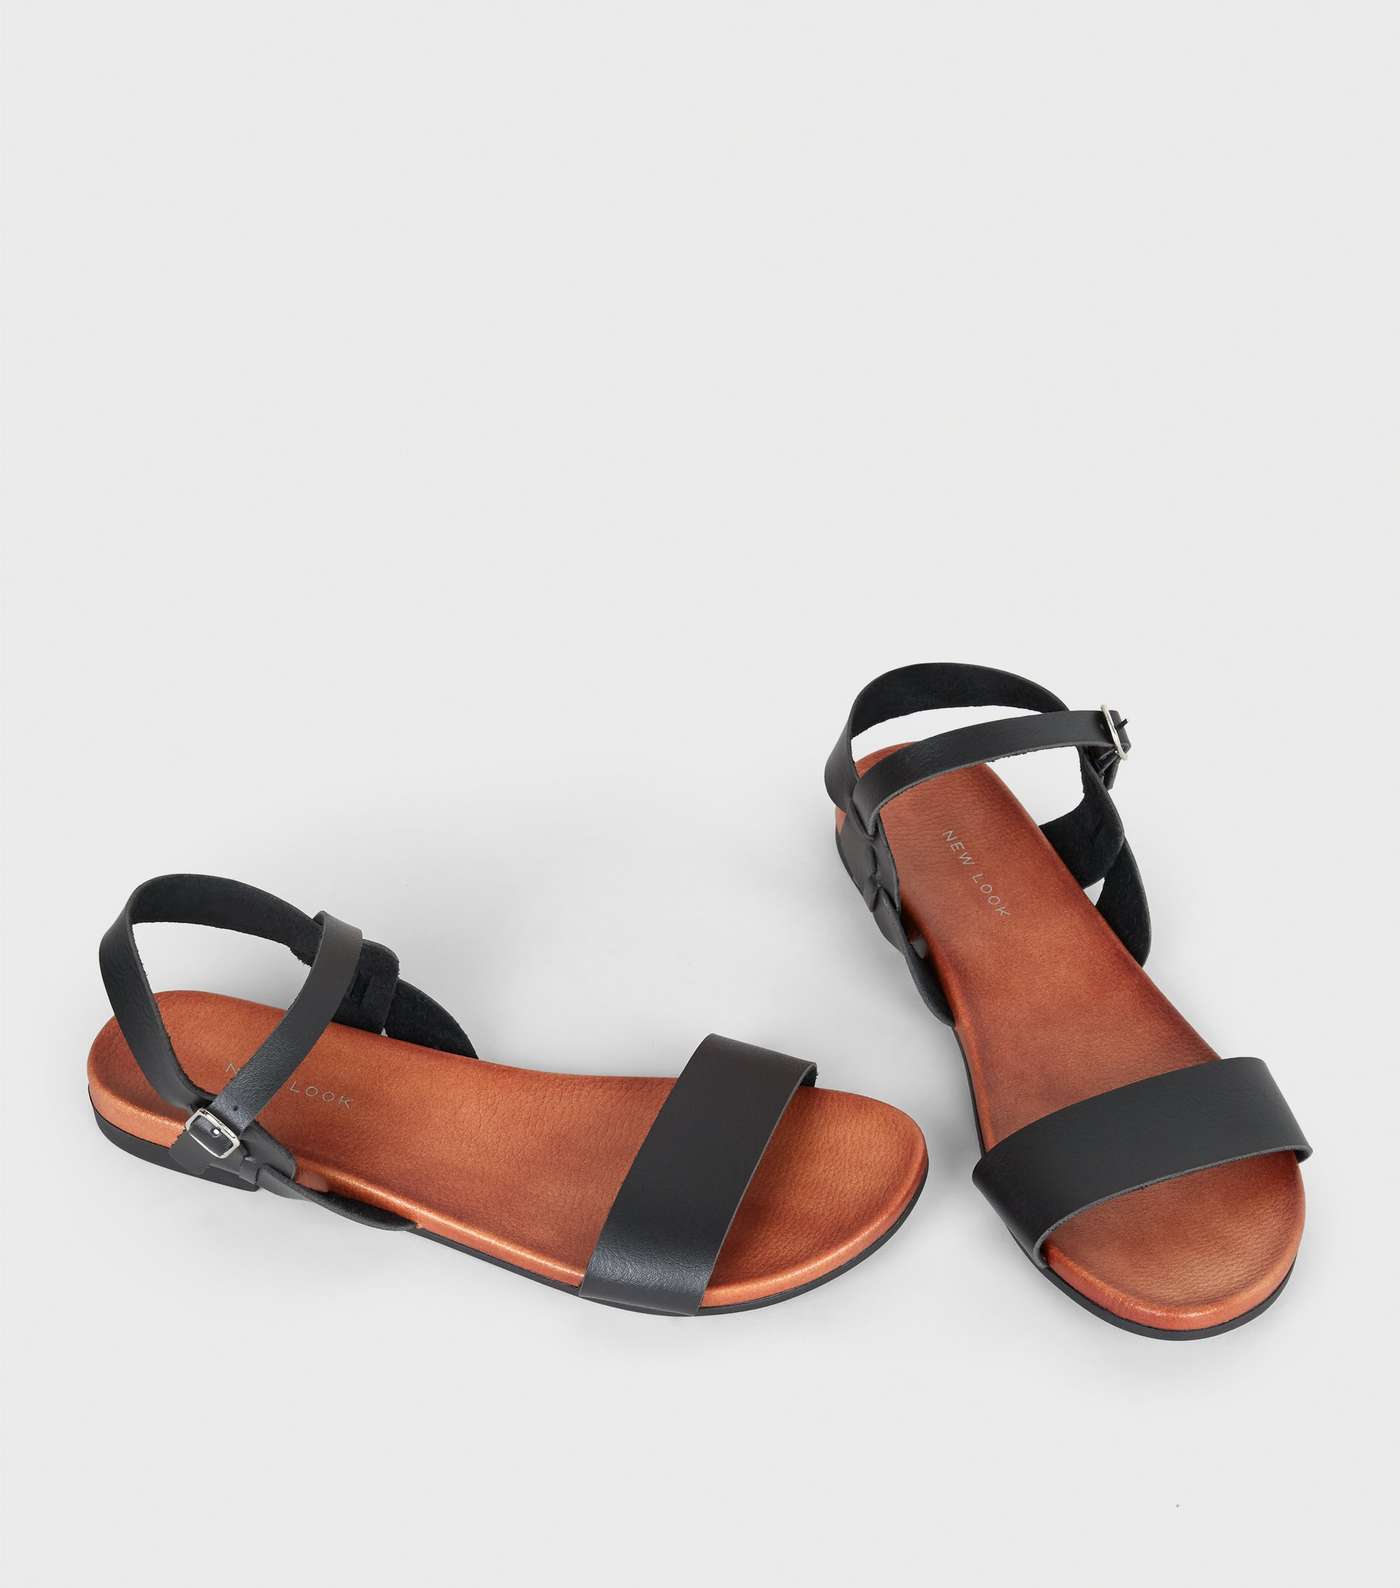 Black Leather-Look 2 Part Footbed Sandals Image 3